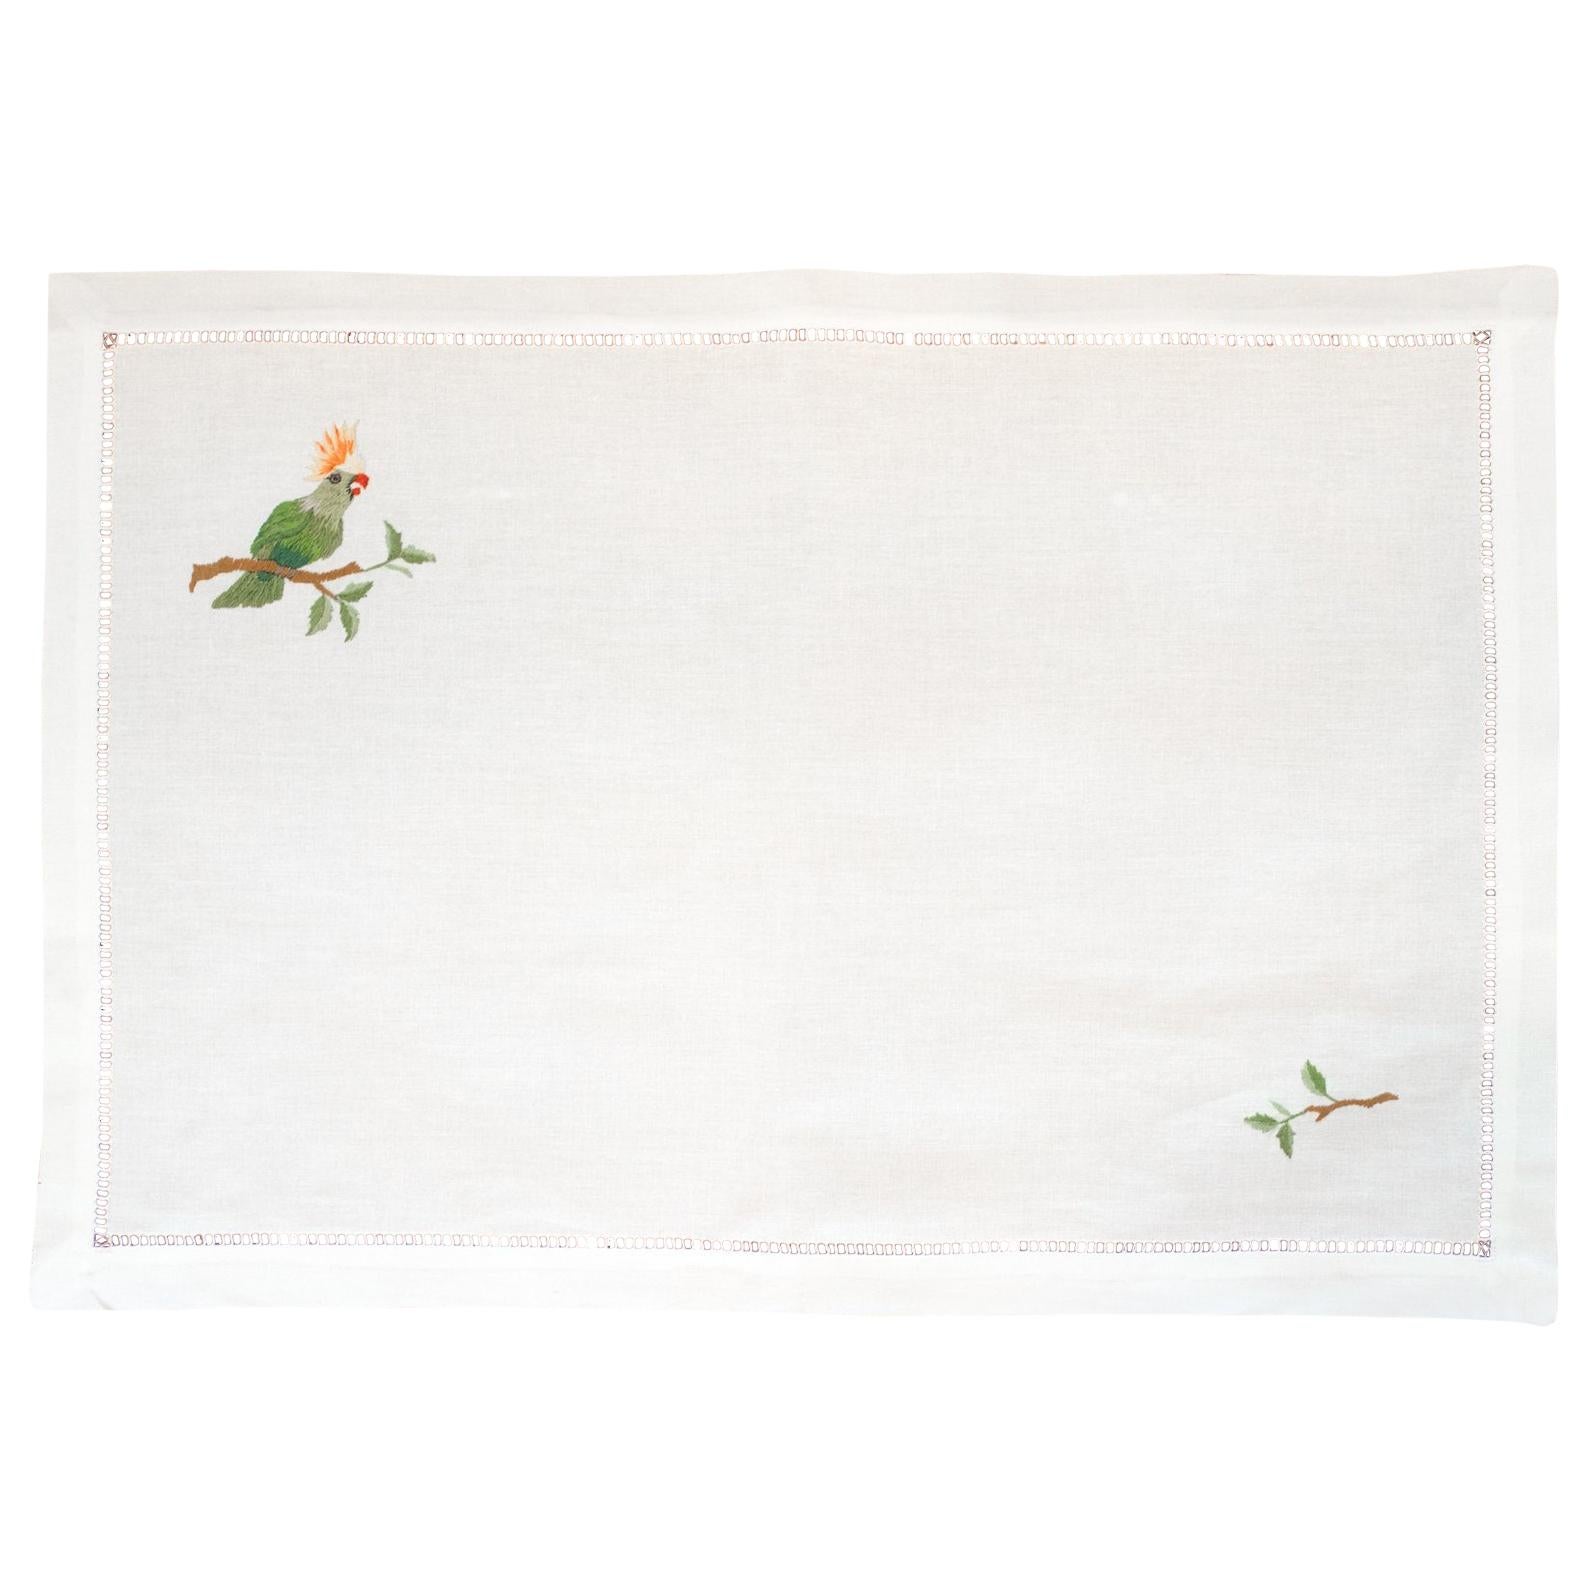 Set of 12 Hand Embroidered Table Linen Placemats with Parrots